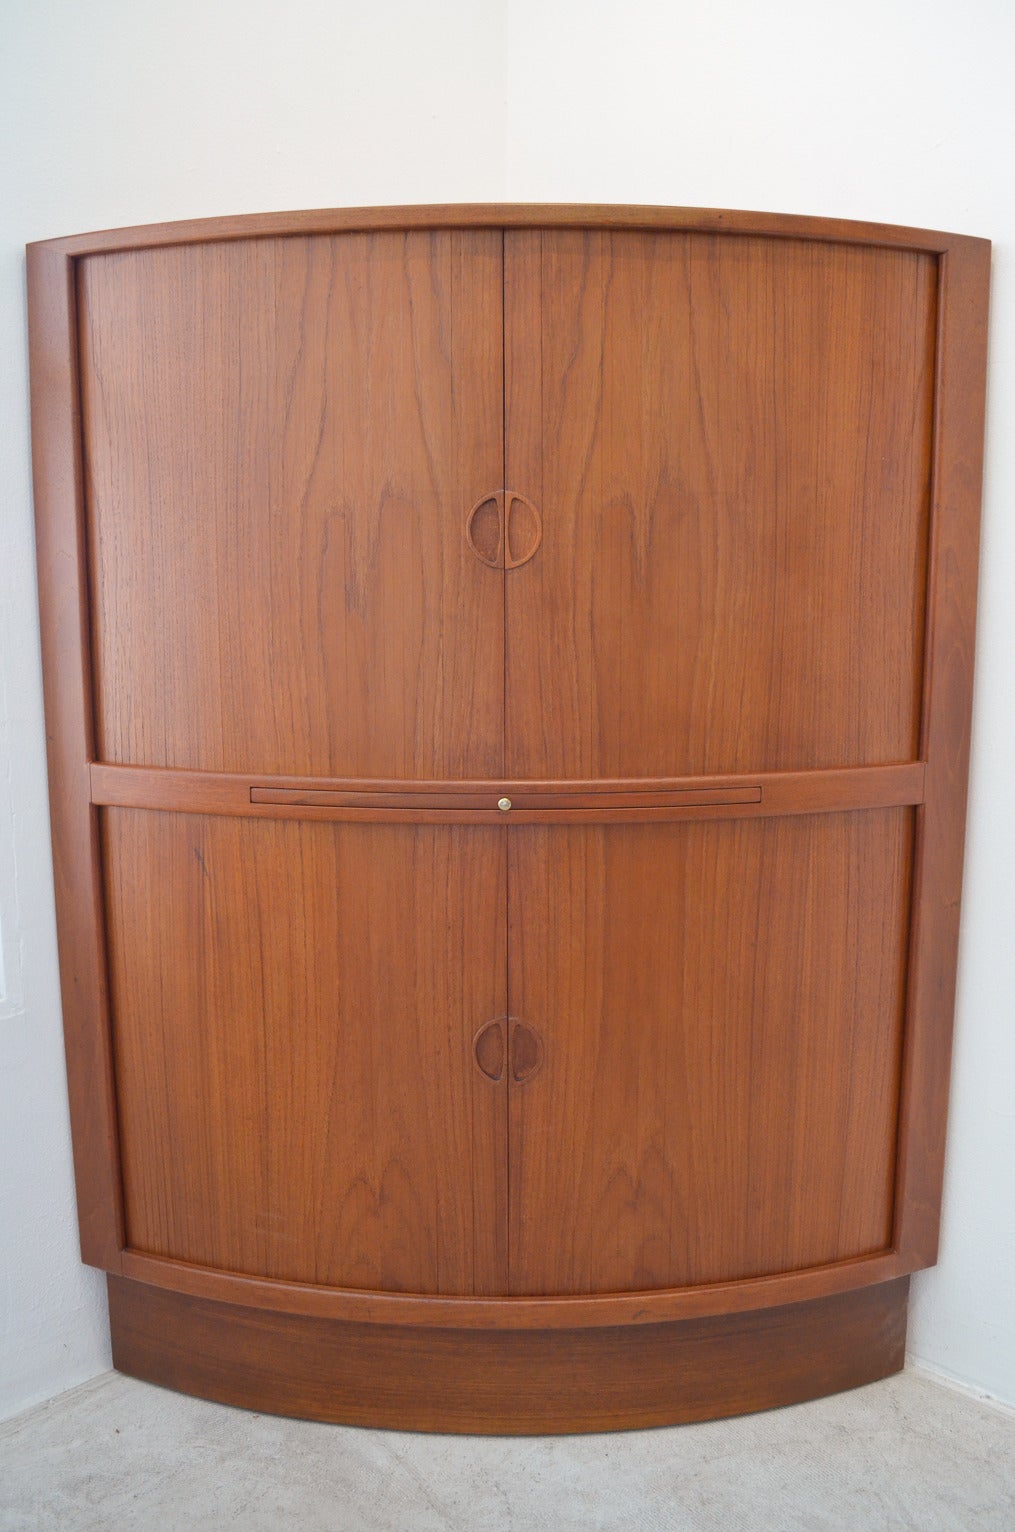 Unique tambour door corner bar in teak has been professionally restored and in excellent condition. Both upper and lower compartments have teak tambour doors that slide perfectly.

Upper section has two adjustable shelves with black laminate to